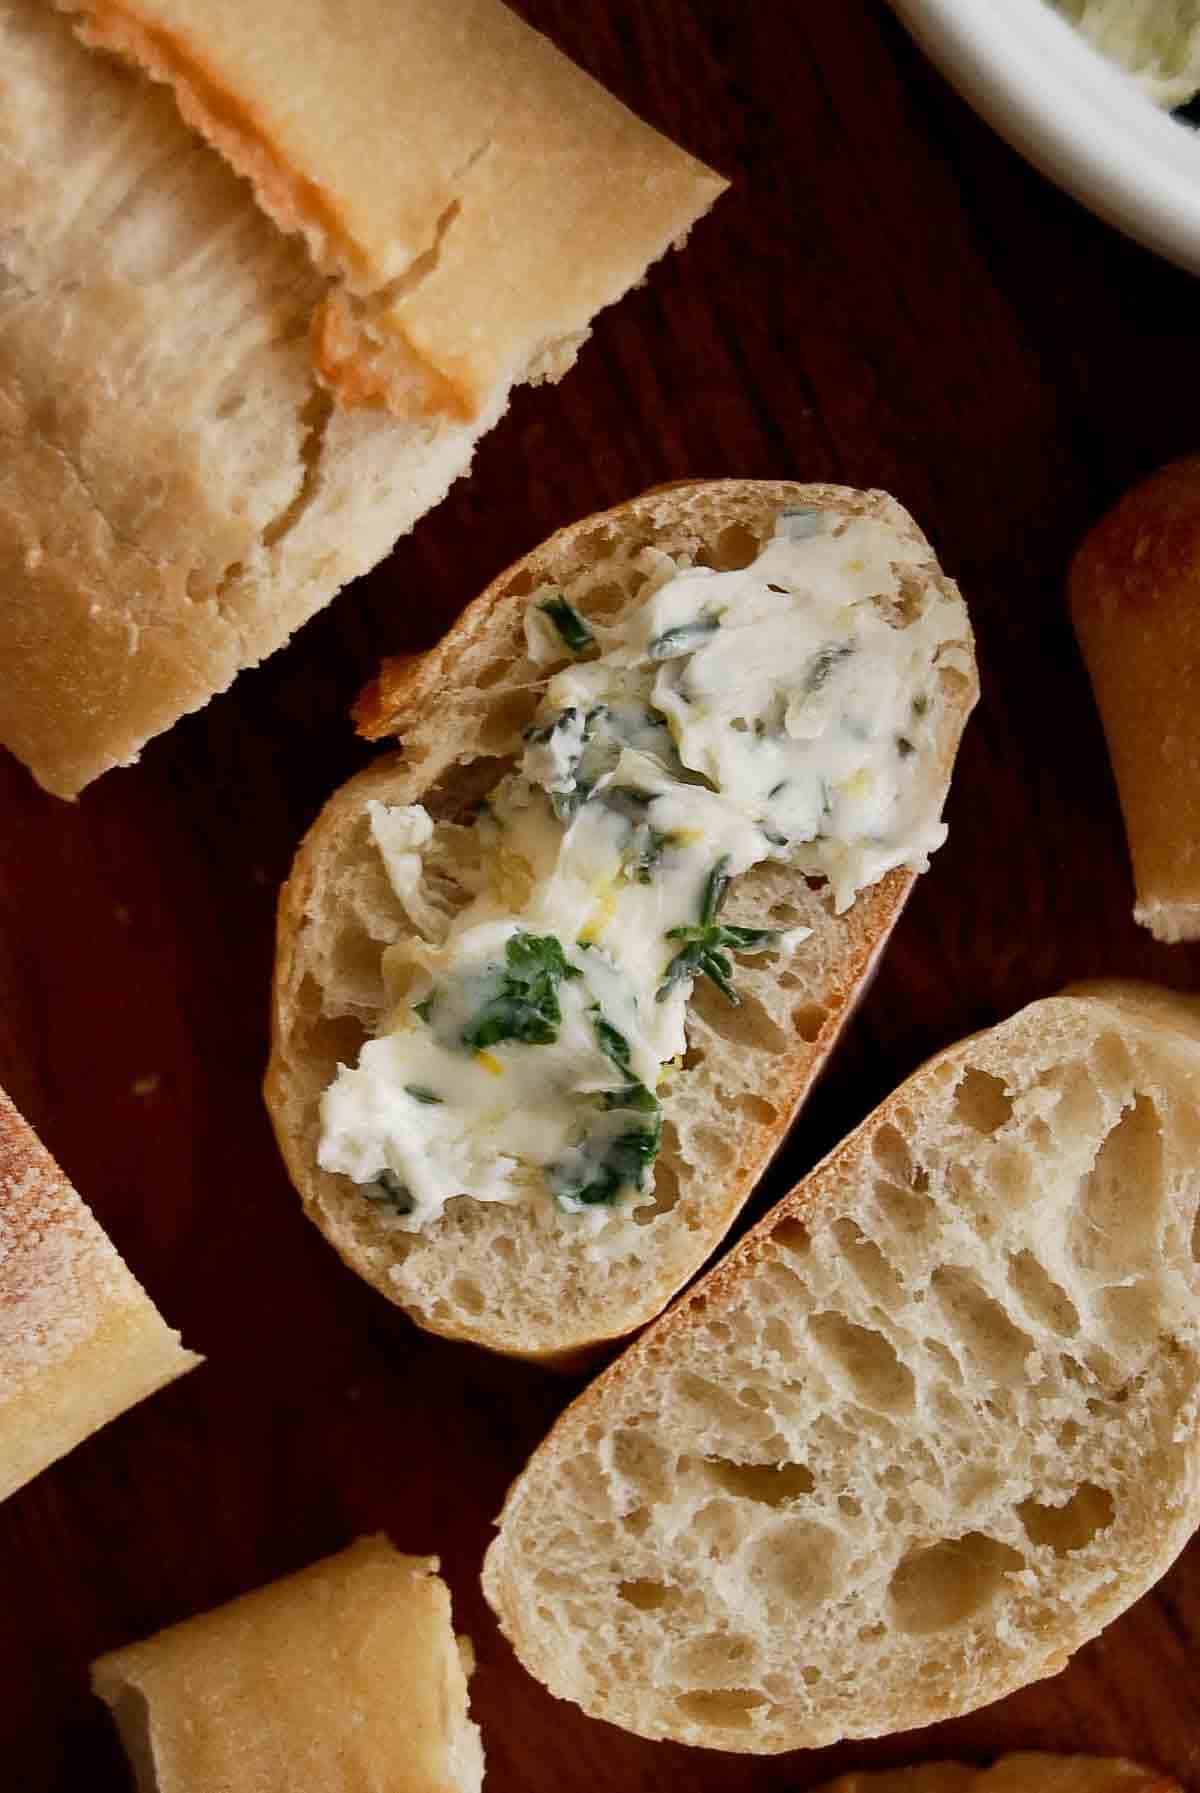 roasted garlic butter with herbs spread onto a baguette.